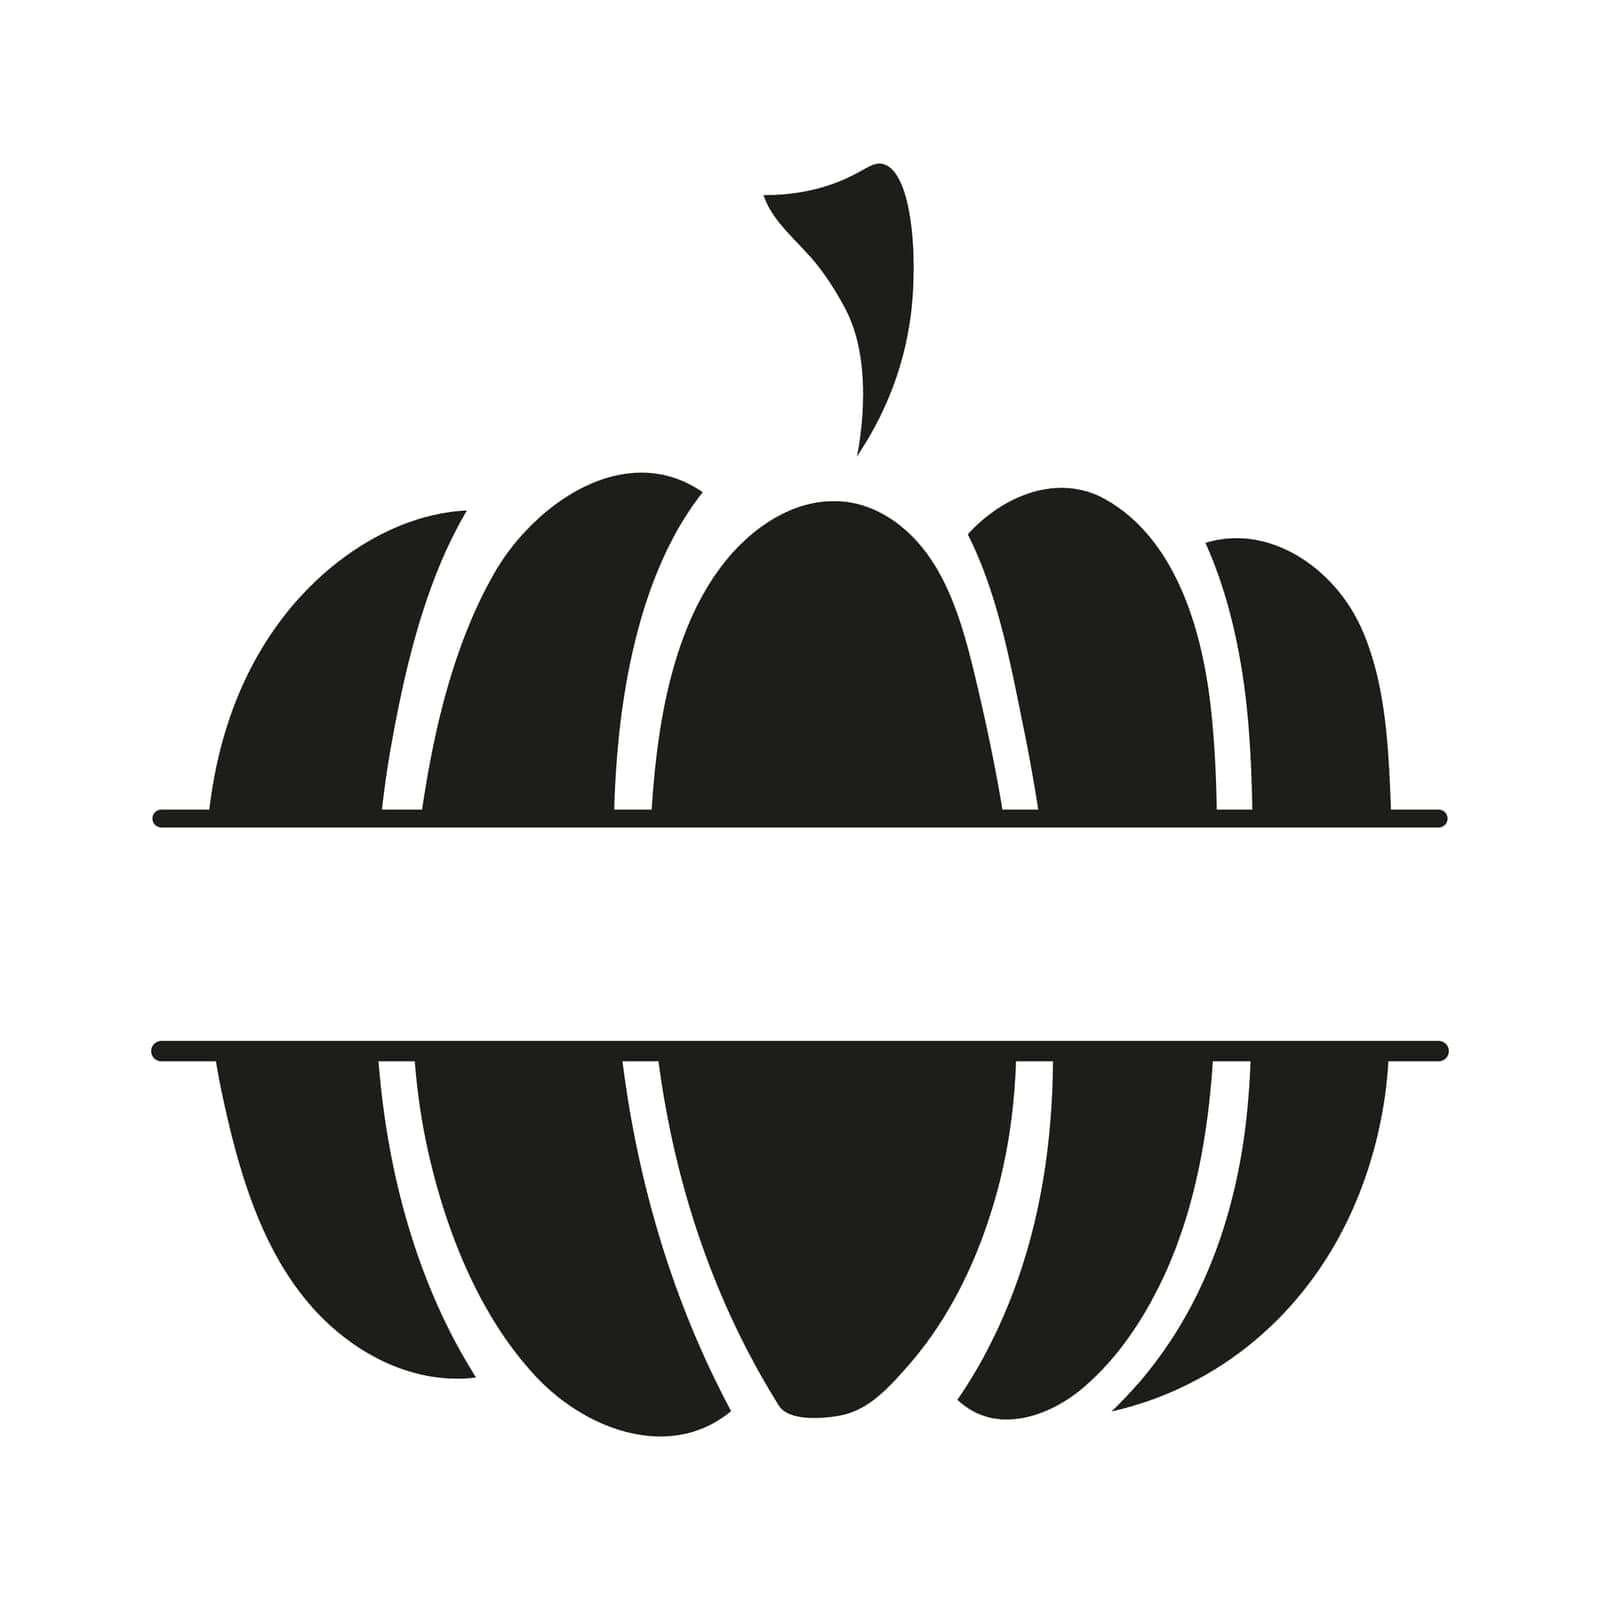 Pumpkin black ink icon for fall. Thanksgiving and Halloween Elements.Pumpkin Flat Design Vegetable Icon